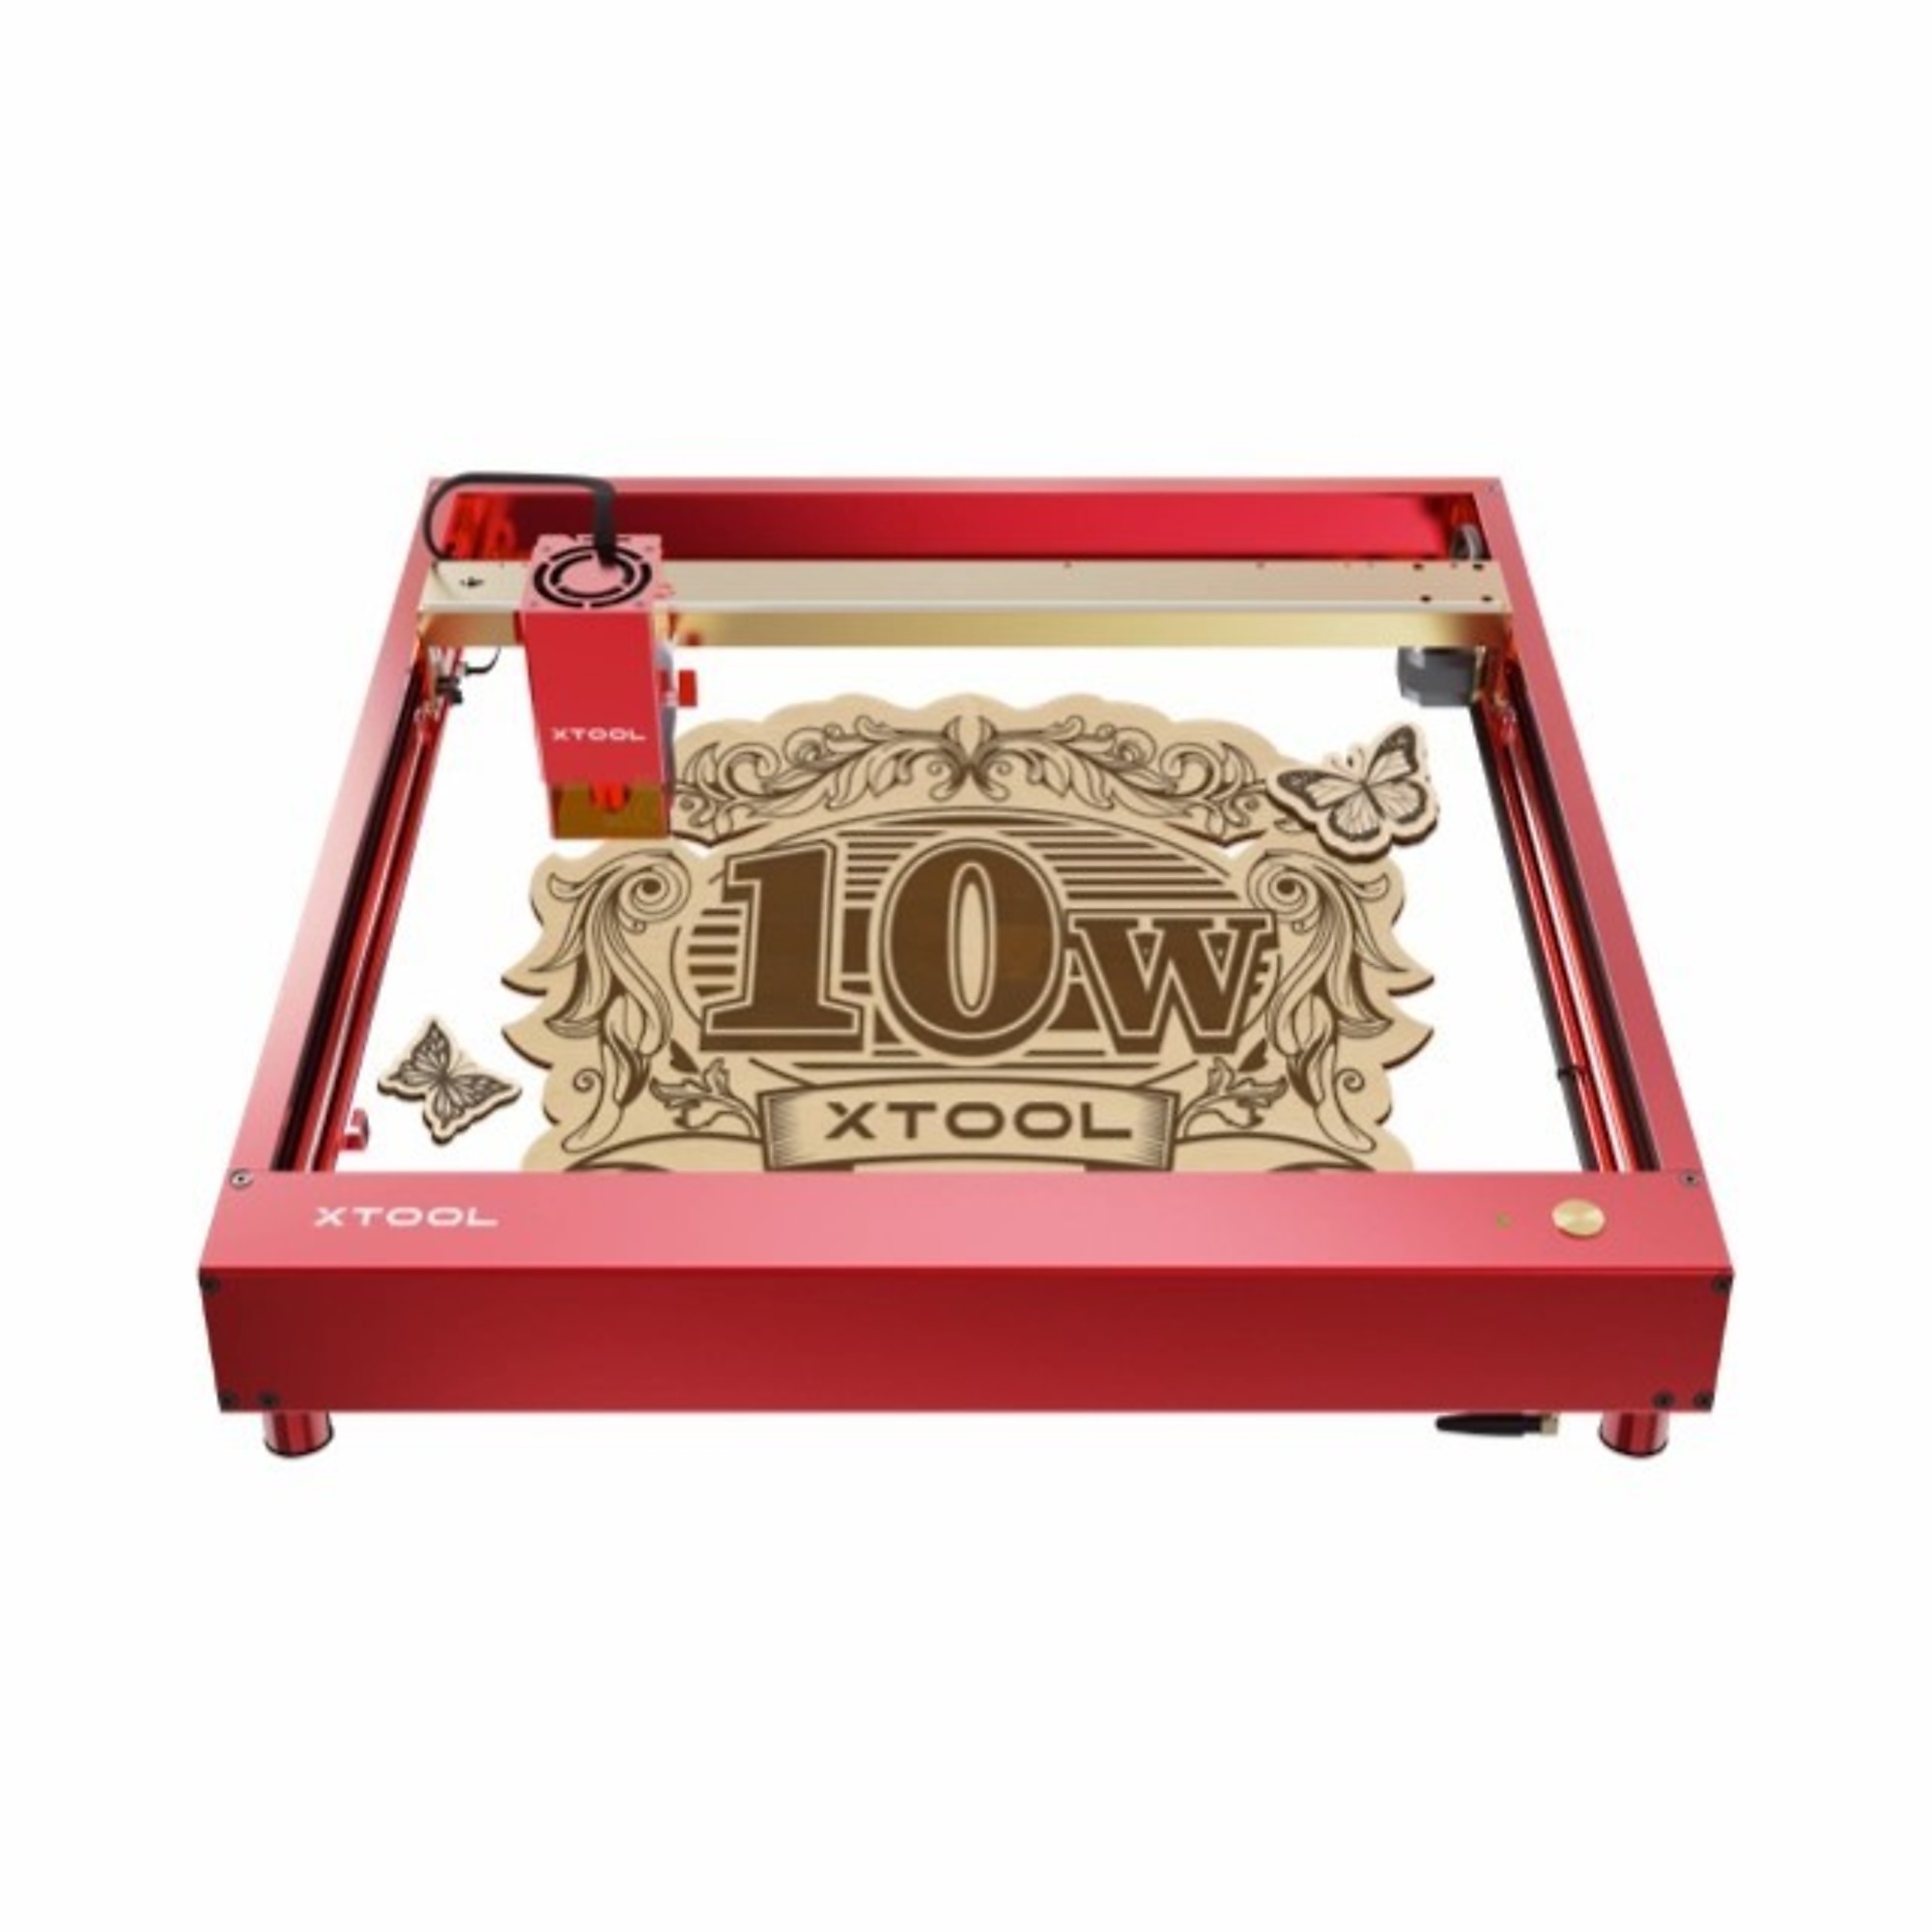 xTool, Laser Cutter and Engraver, 10w, 400mm/s, Model, Working Width 14.57 in, Working Length 31.89 in, Laser Power 10 W, Model P1030312